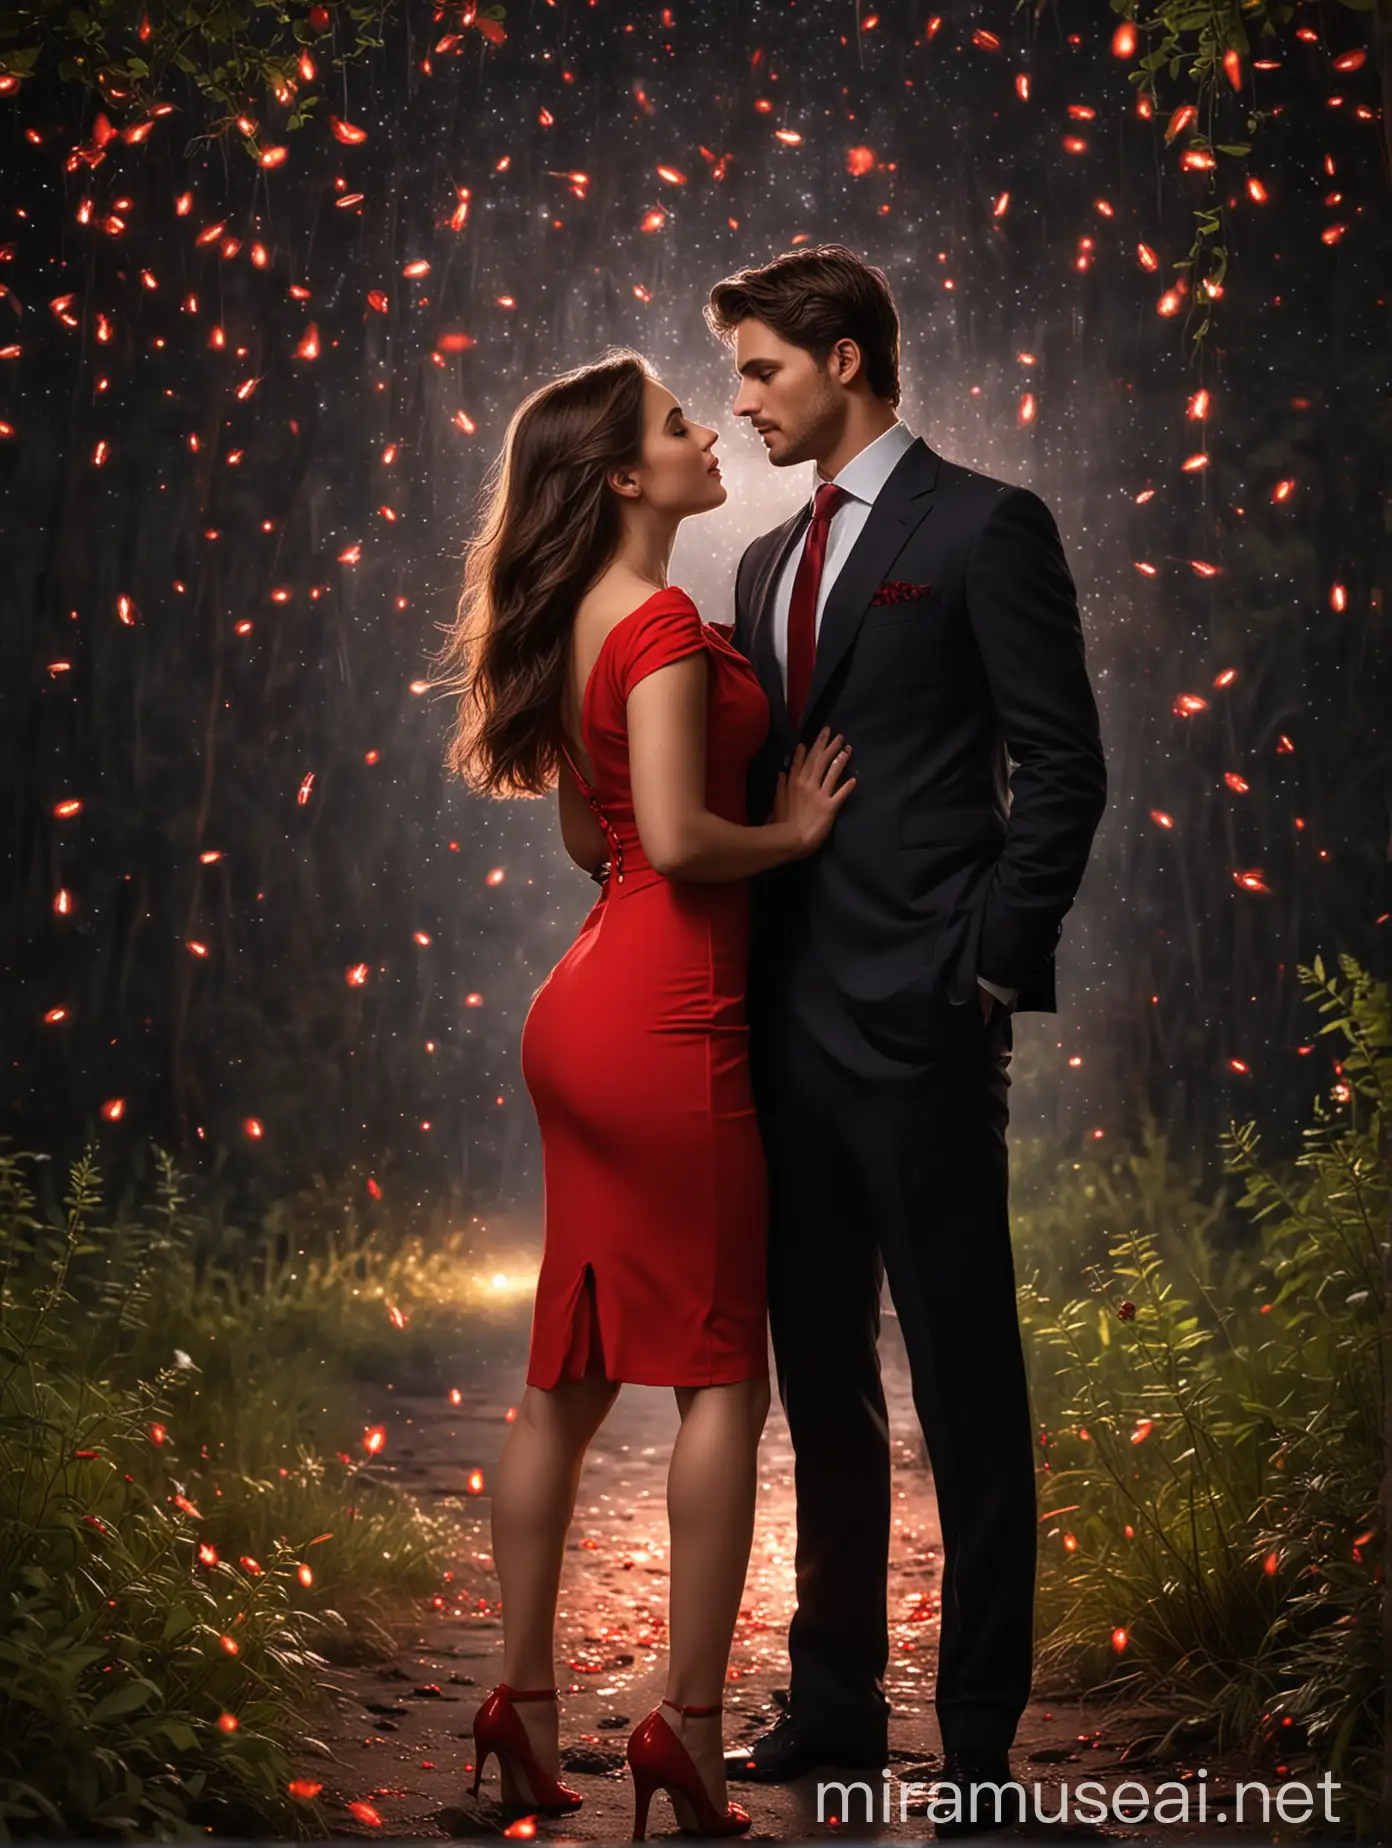 Romantic Couple in Red Dress and Suit with Luminous Fireflies at Night